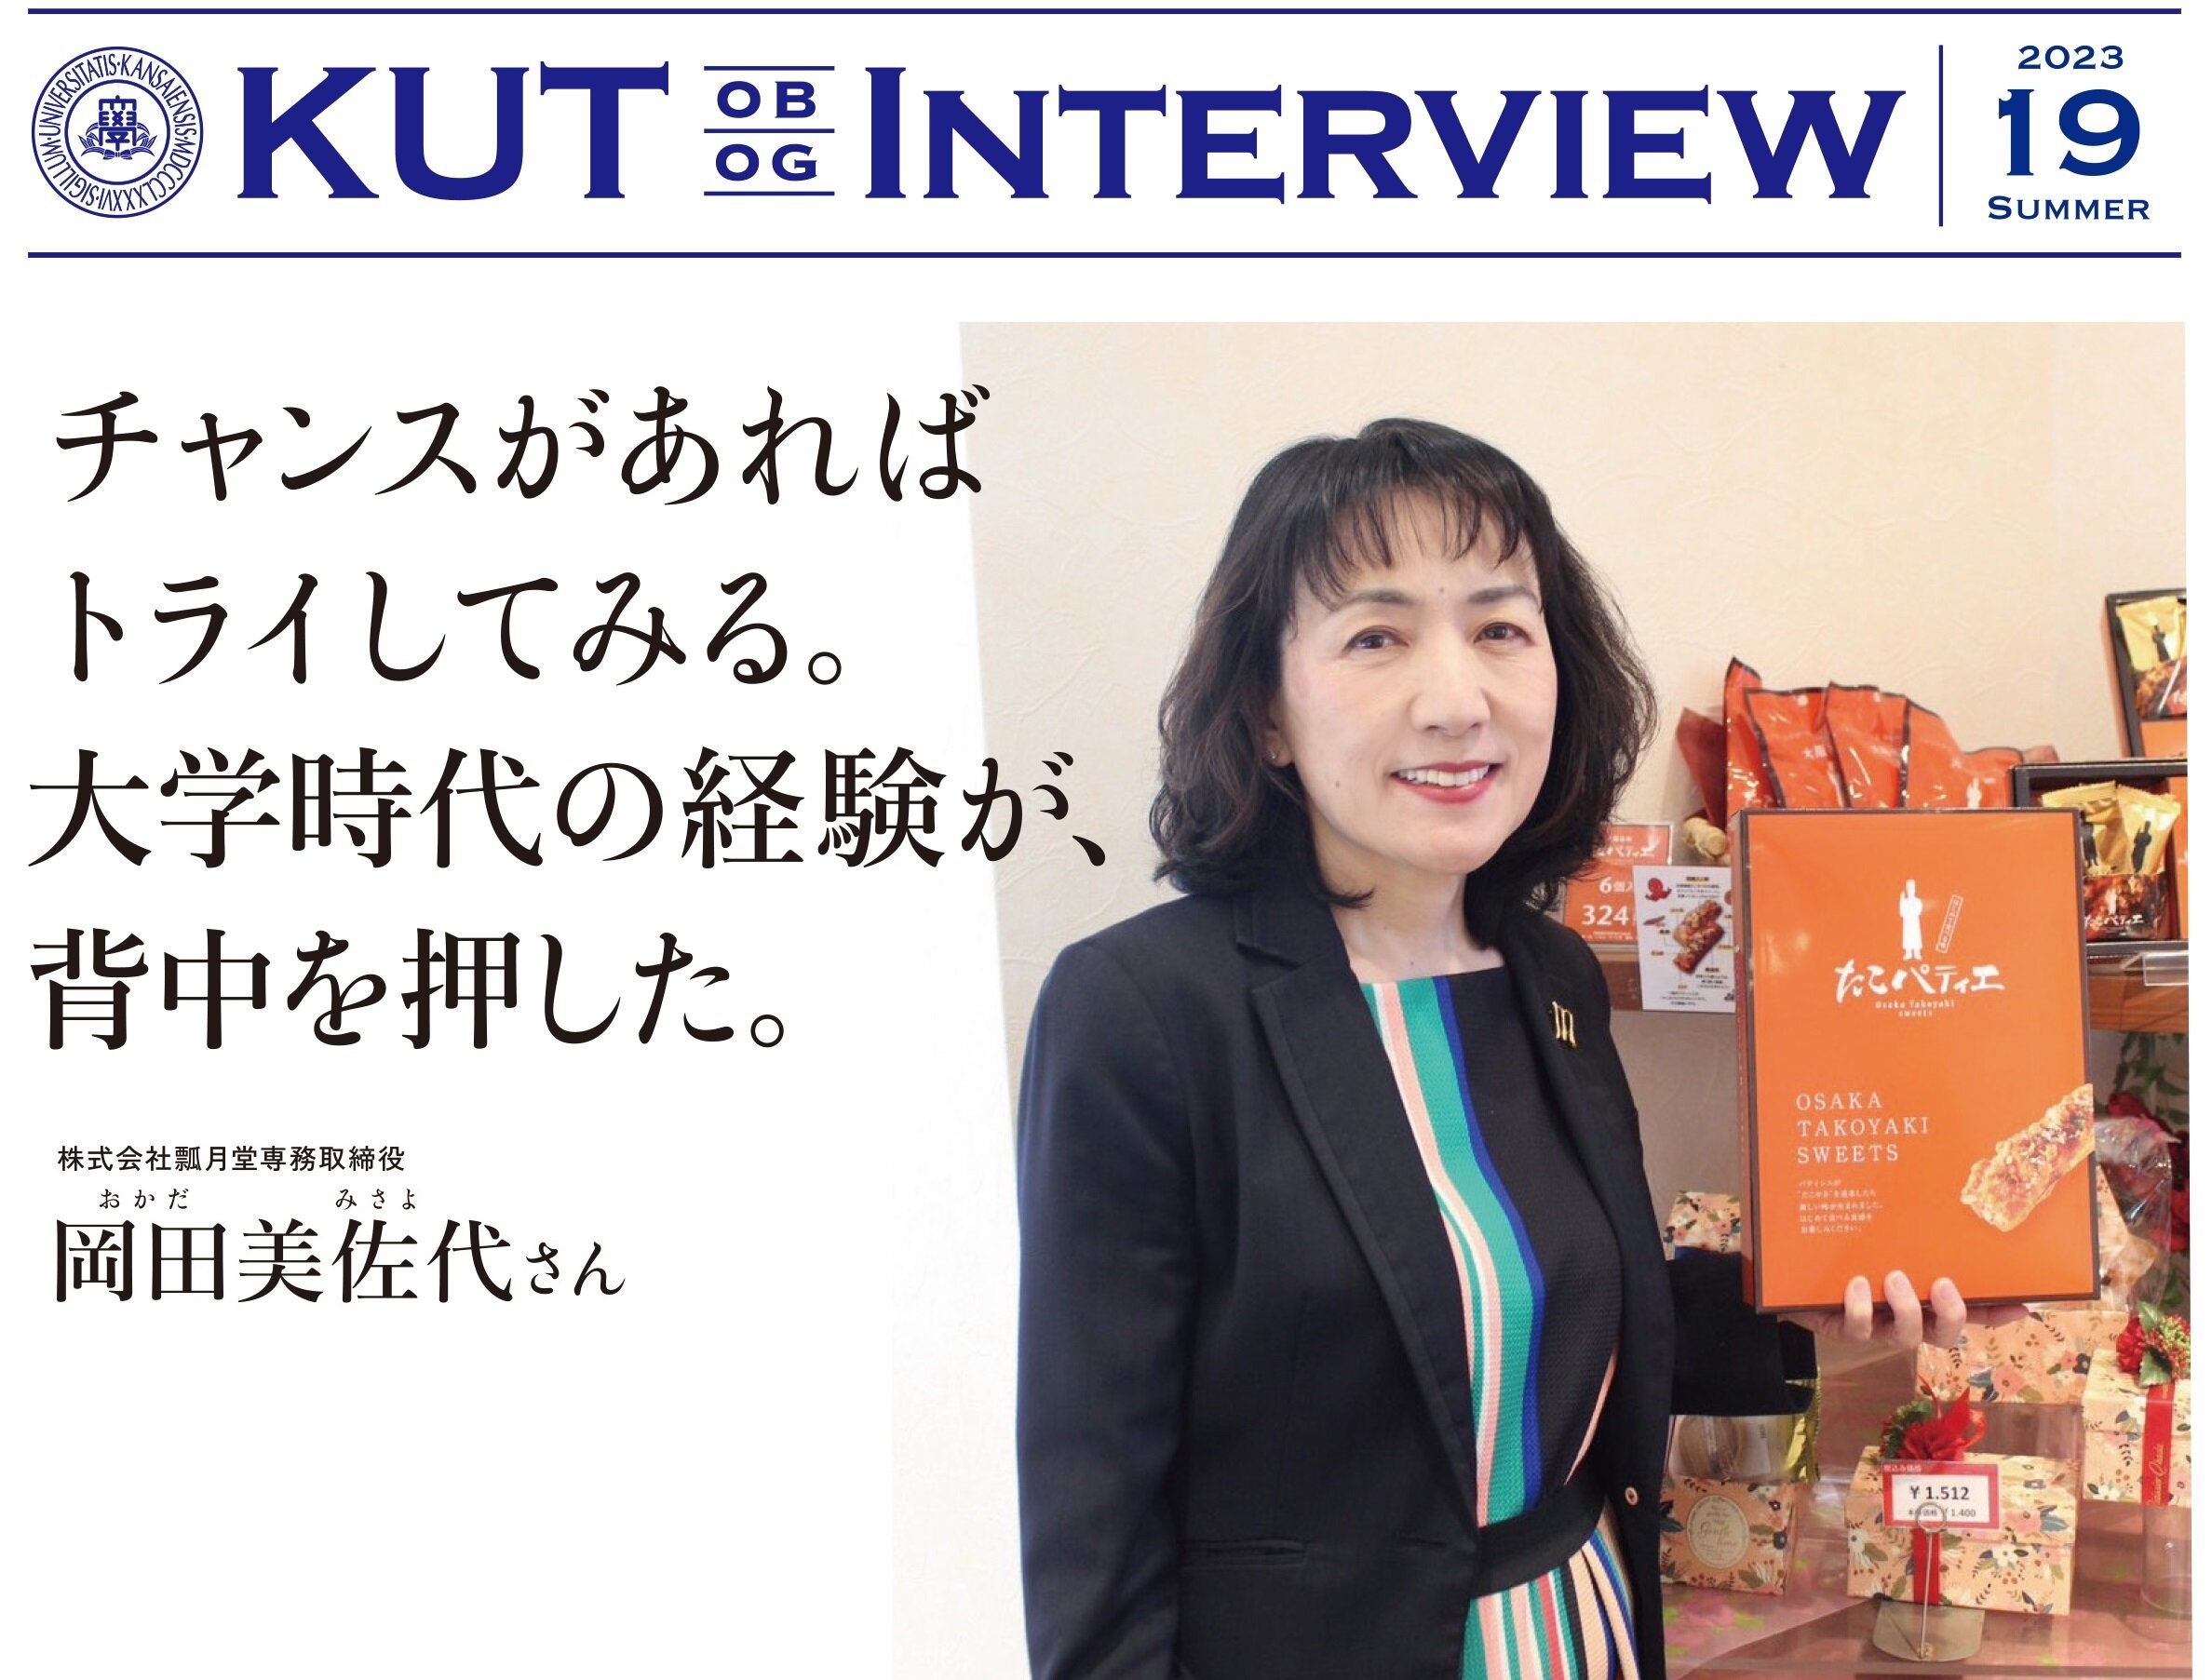 〈KUT INTERVIEW 第１９号〉首都圏で活躍する卒業生をご紹介します！